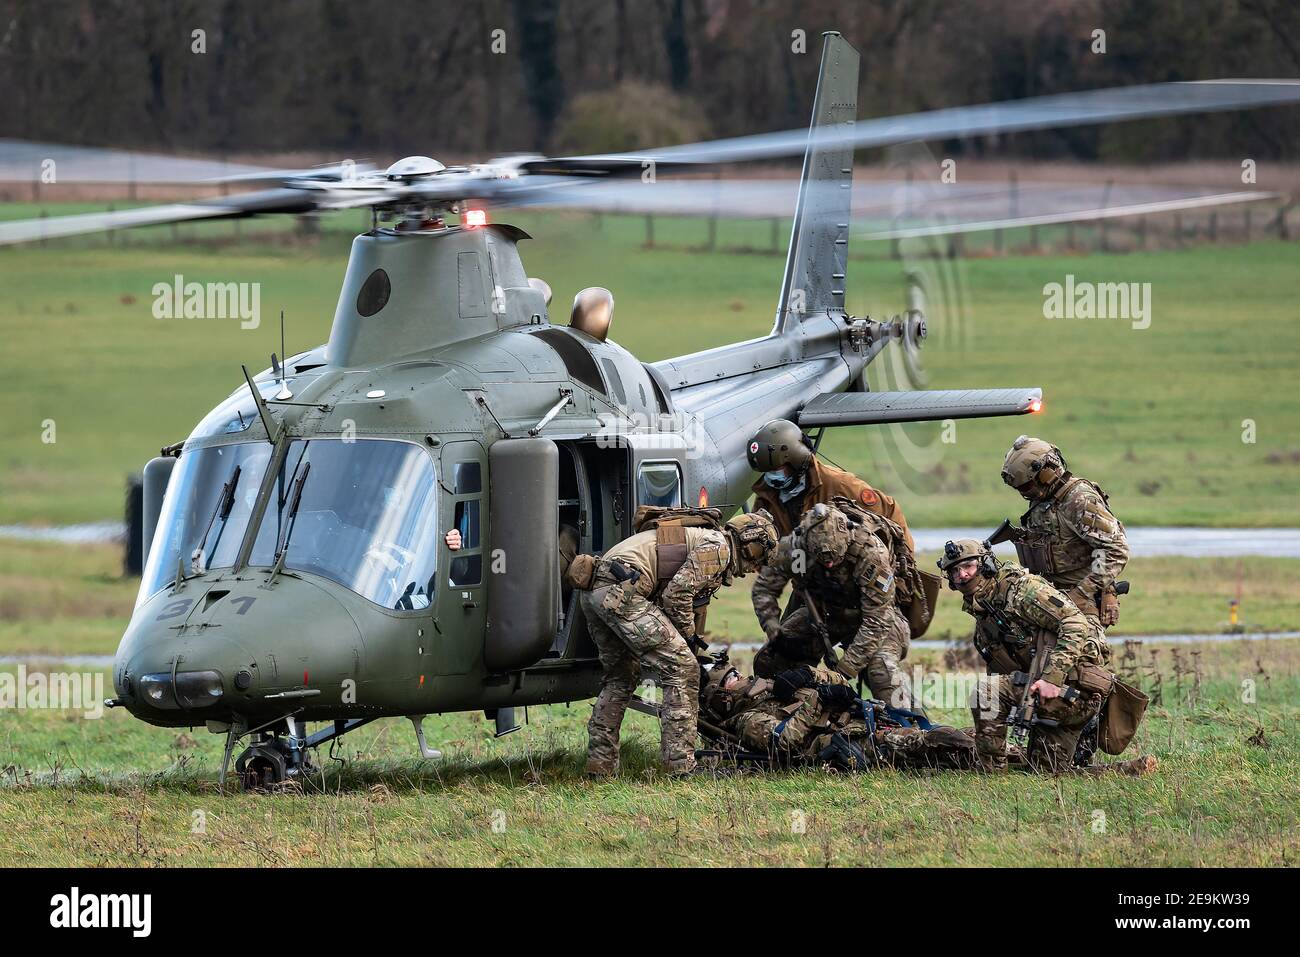 A AgustaWestland AW109 military helicopter from the 17th Squadron of the Belgian Air Force. Stock Photo